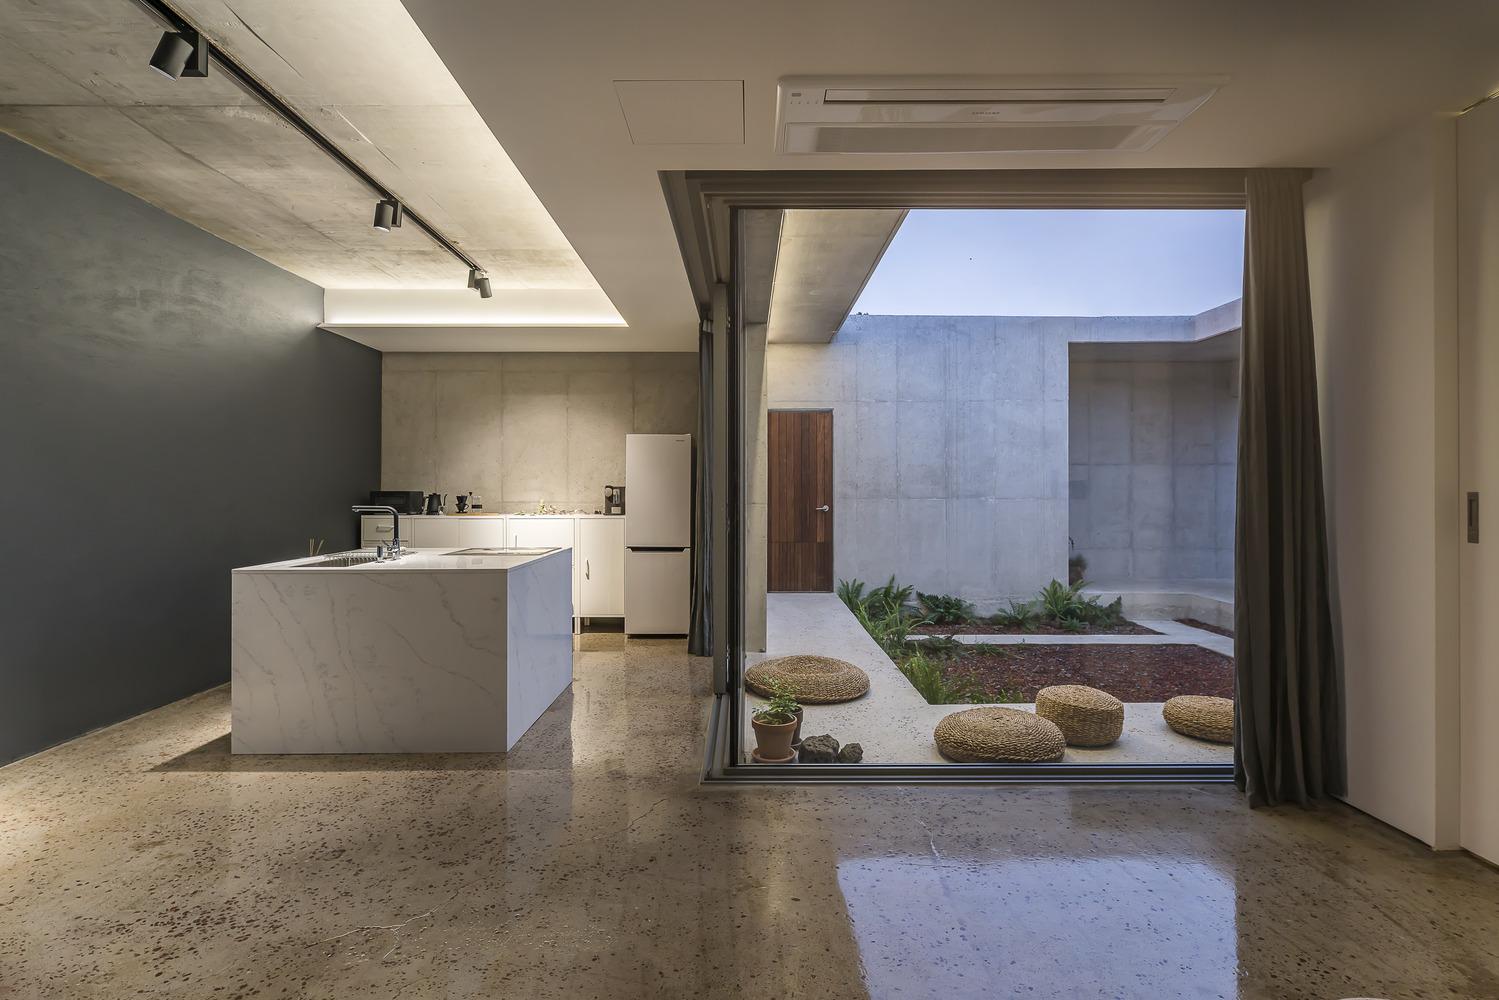 Concrete House With Patio Style Courtyard